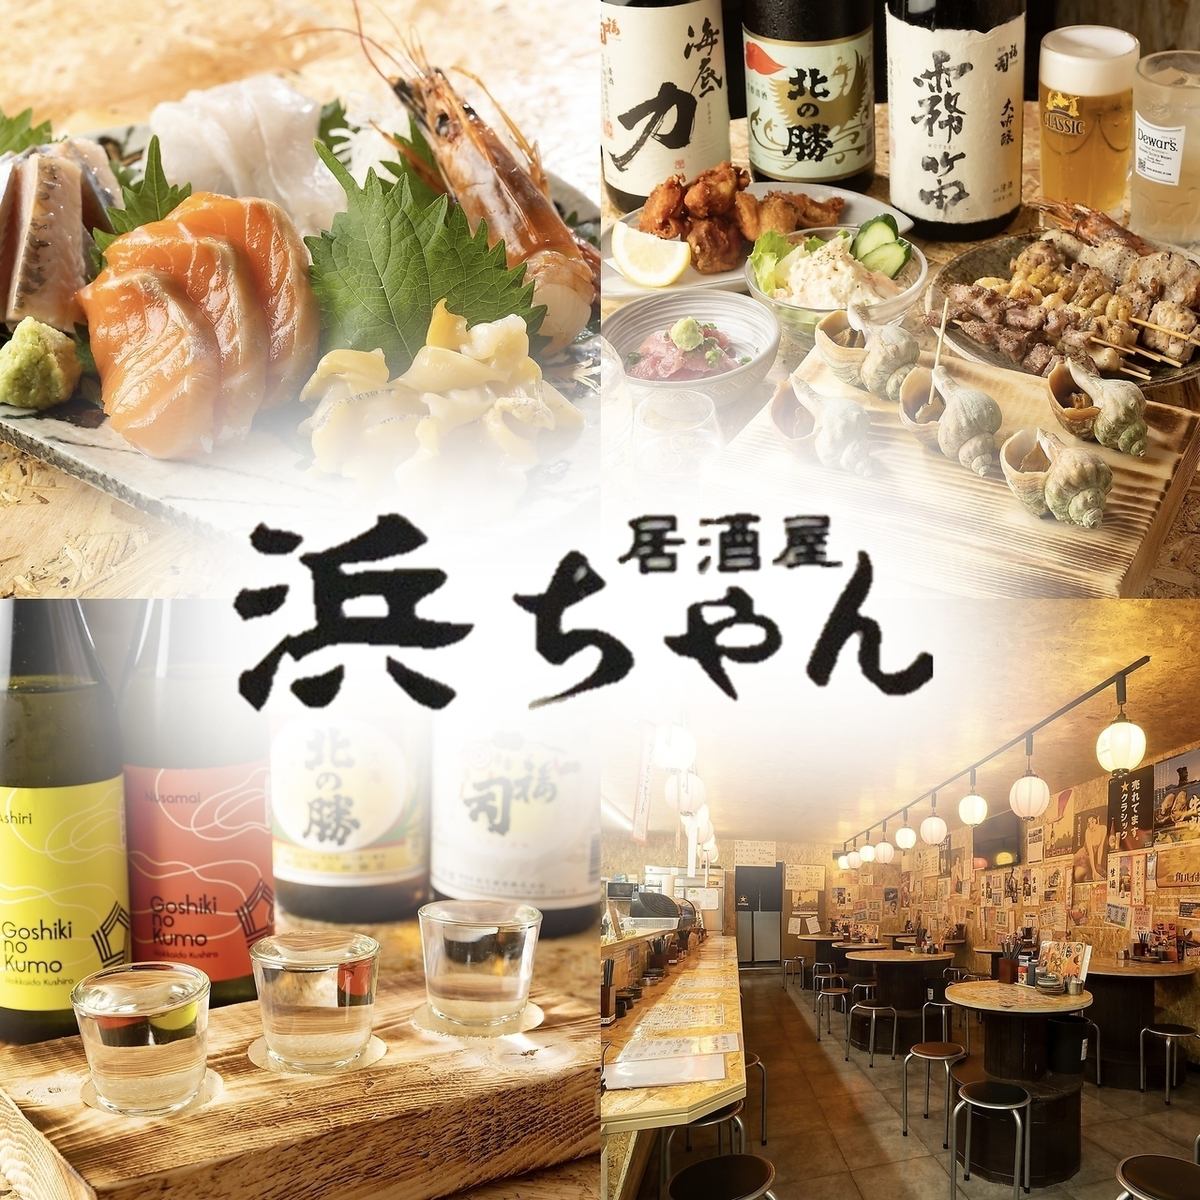 There are many fresh seafood dishes and yakitori menus! Please enjoy while feeling the atmosphere of the stall ◎